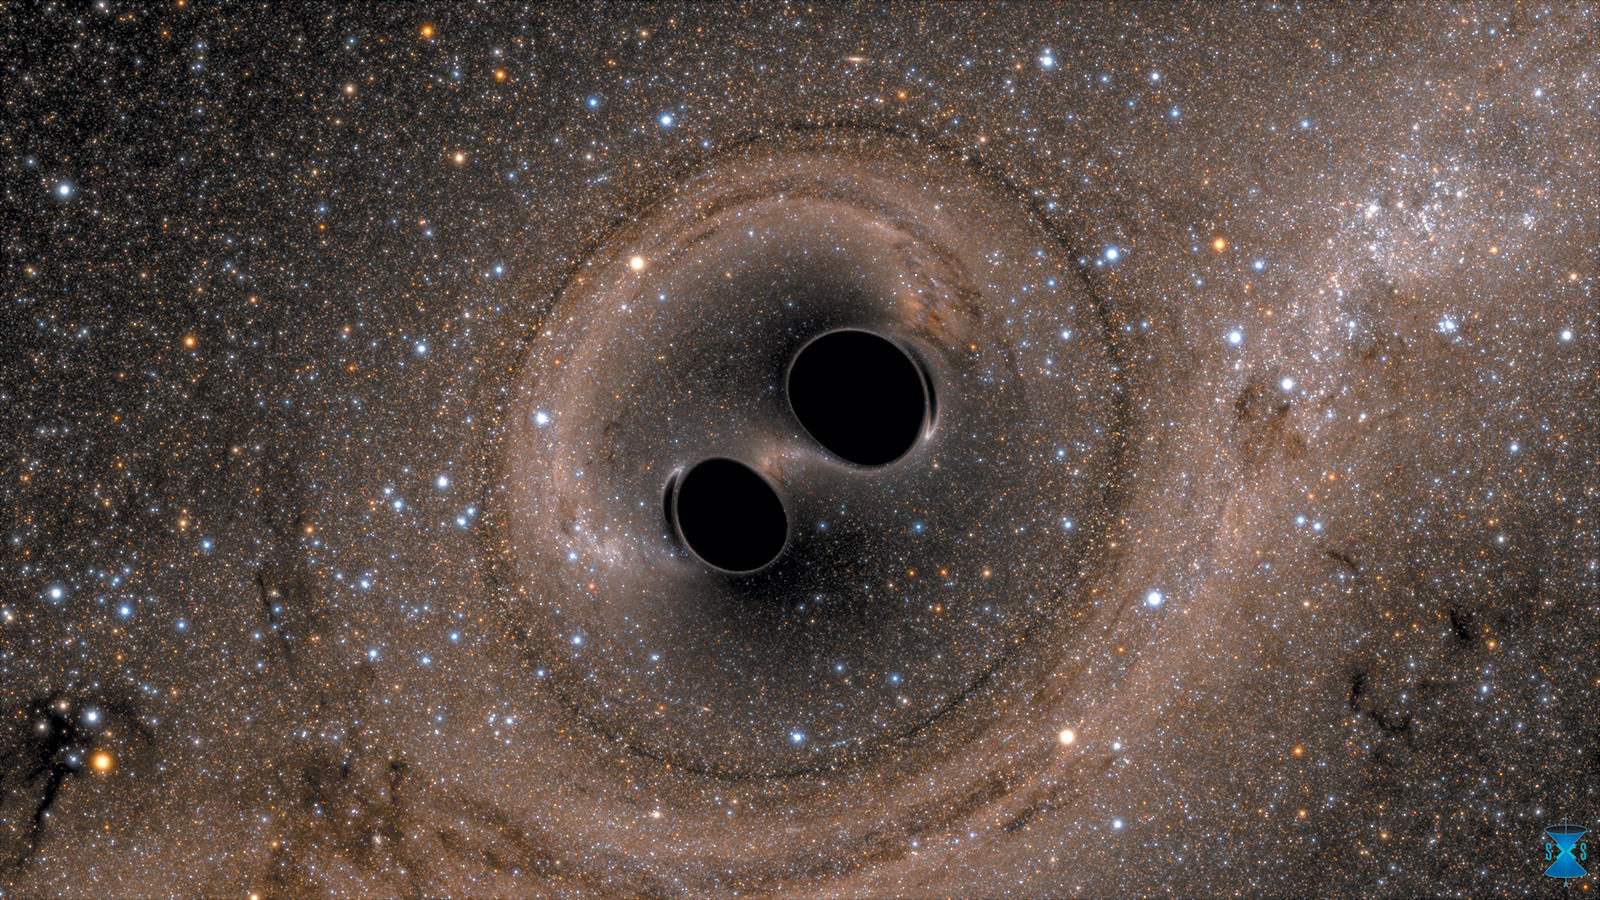 A computer simulation of the collision of two black holes, which merged about 1.3 billion years ago to form a single black hole sixty-two times the mass of the sun. The gravitational waves were detected last September by the Laser Interferometer Gravitational-Wave Observatory (LIGO), which announced the discovery in February 2016.